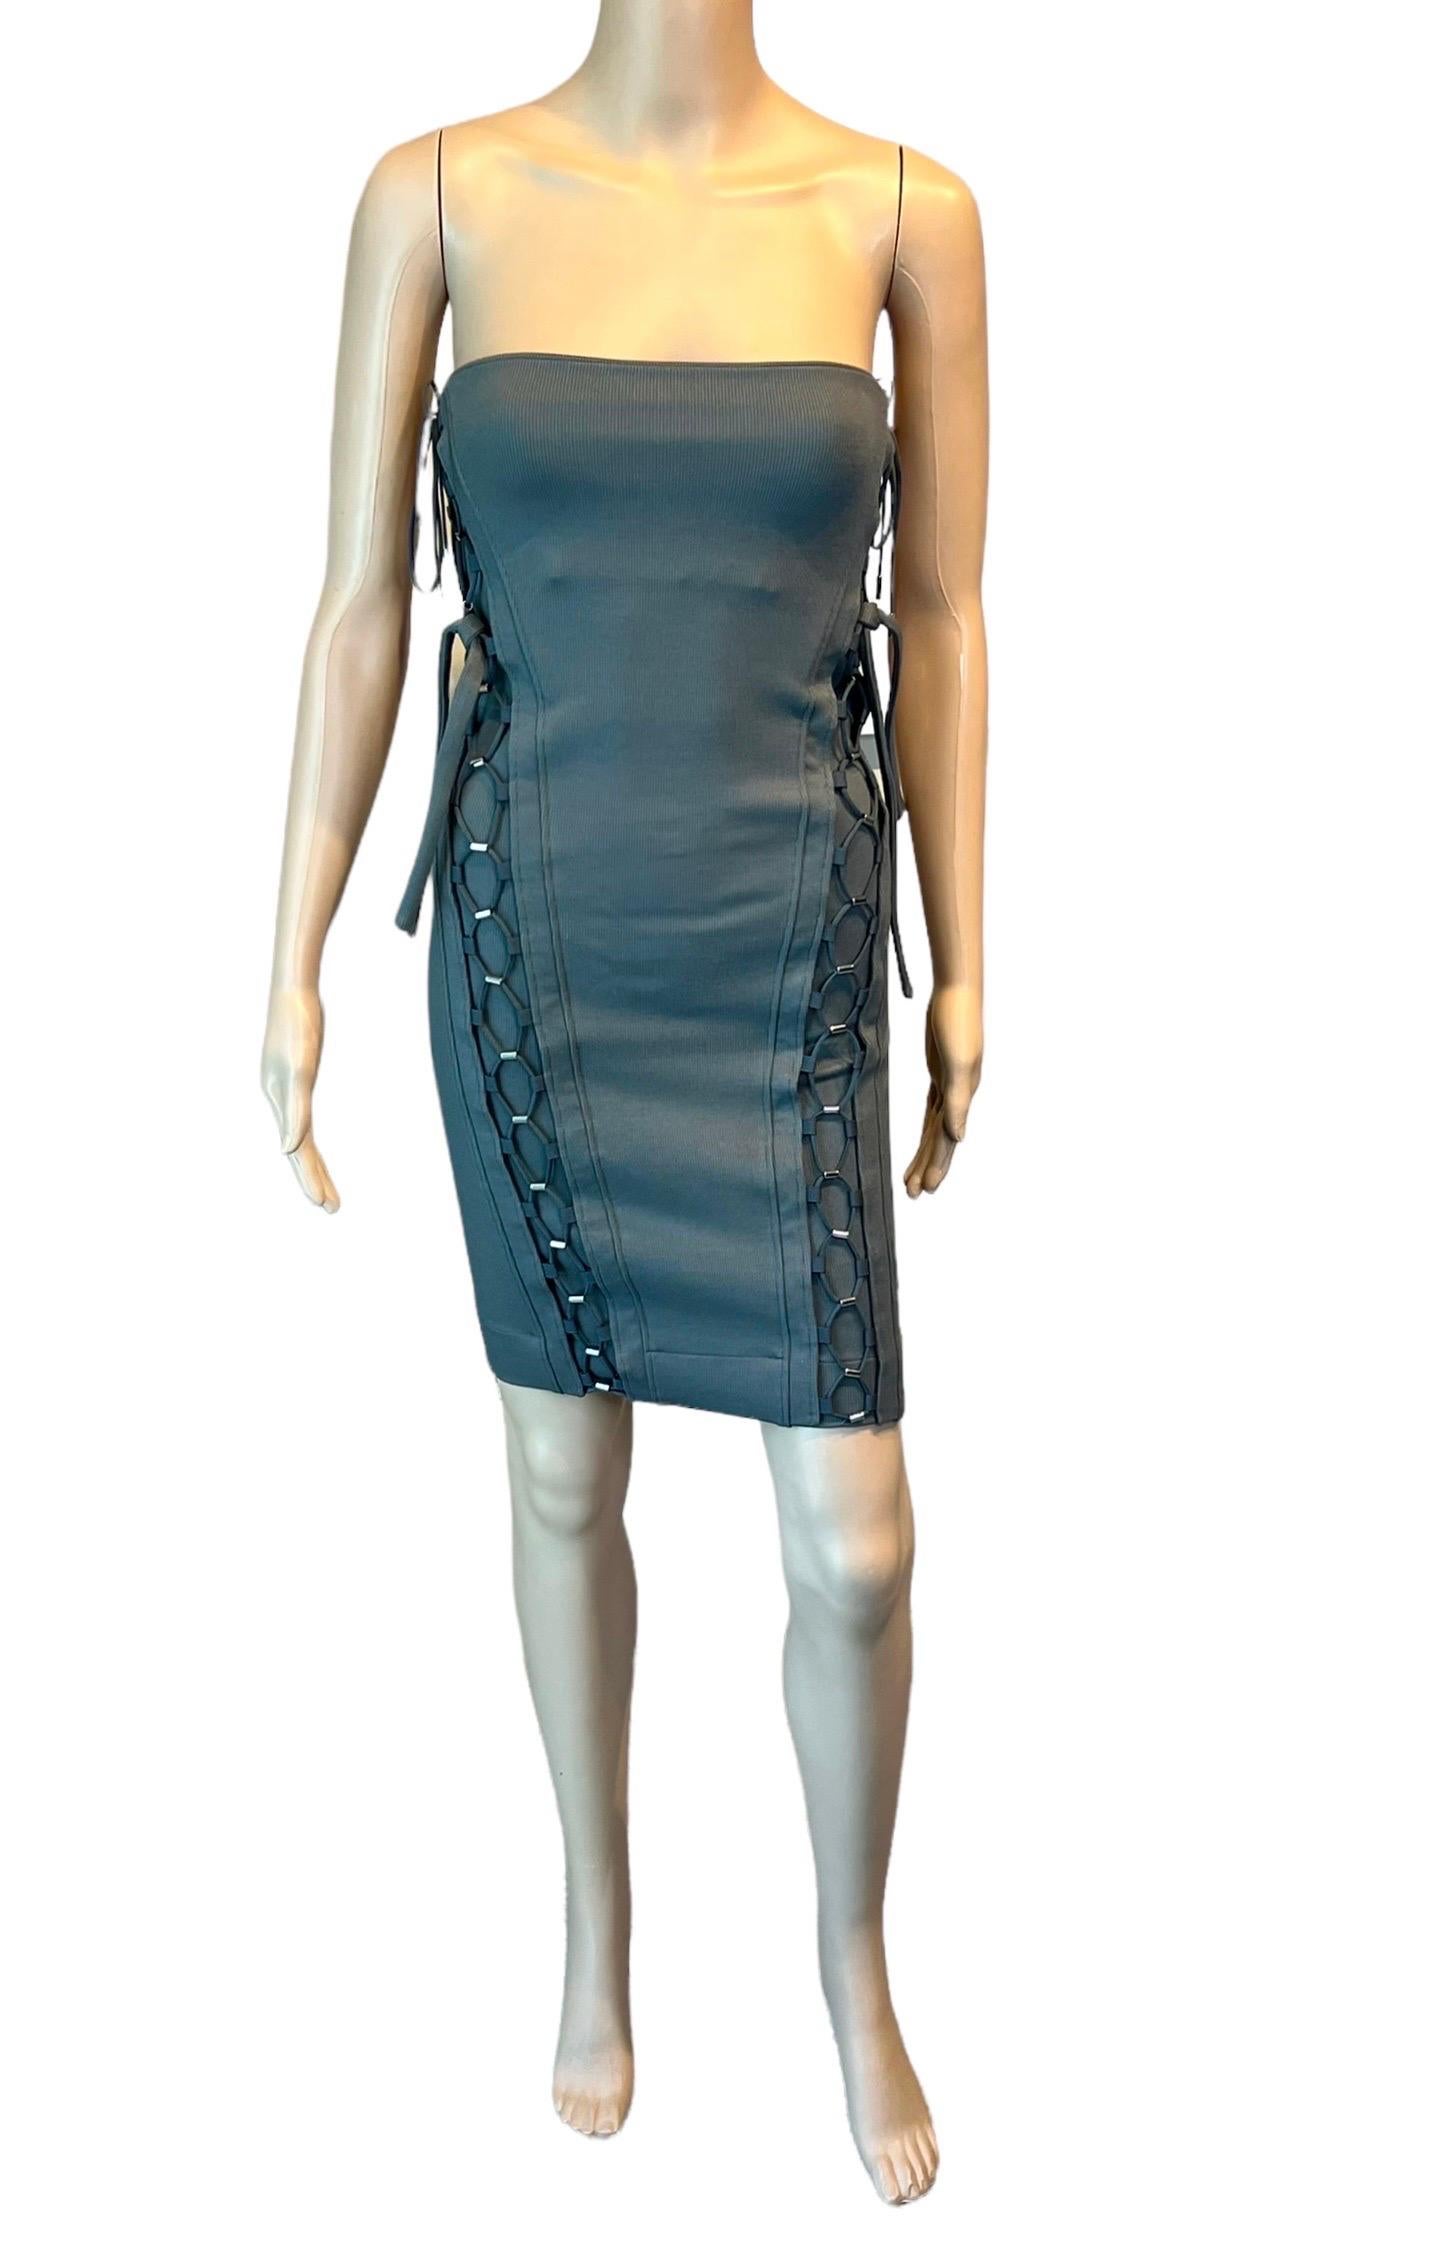 Gucci S/S 2010 Unworn Bodycon Lace Up Bandage Grey Mini Dress In New Condition For Sale In Naples, FL